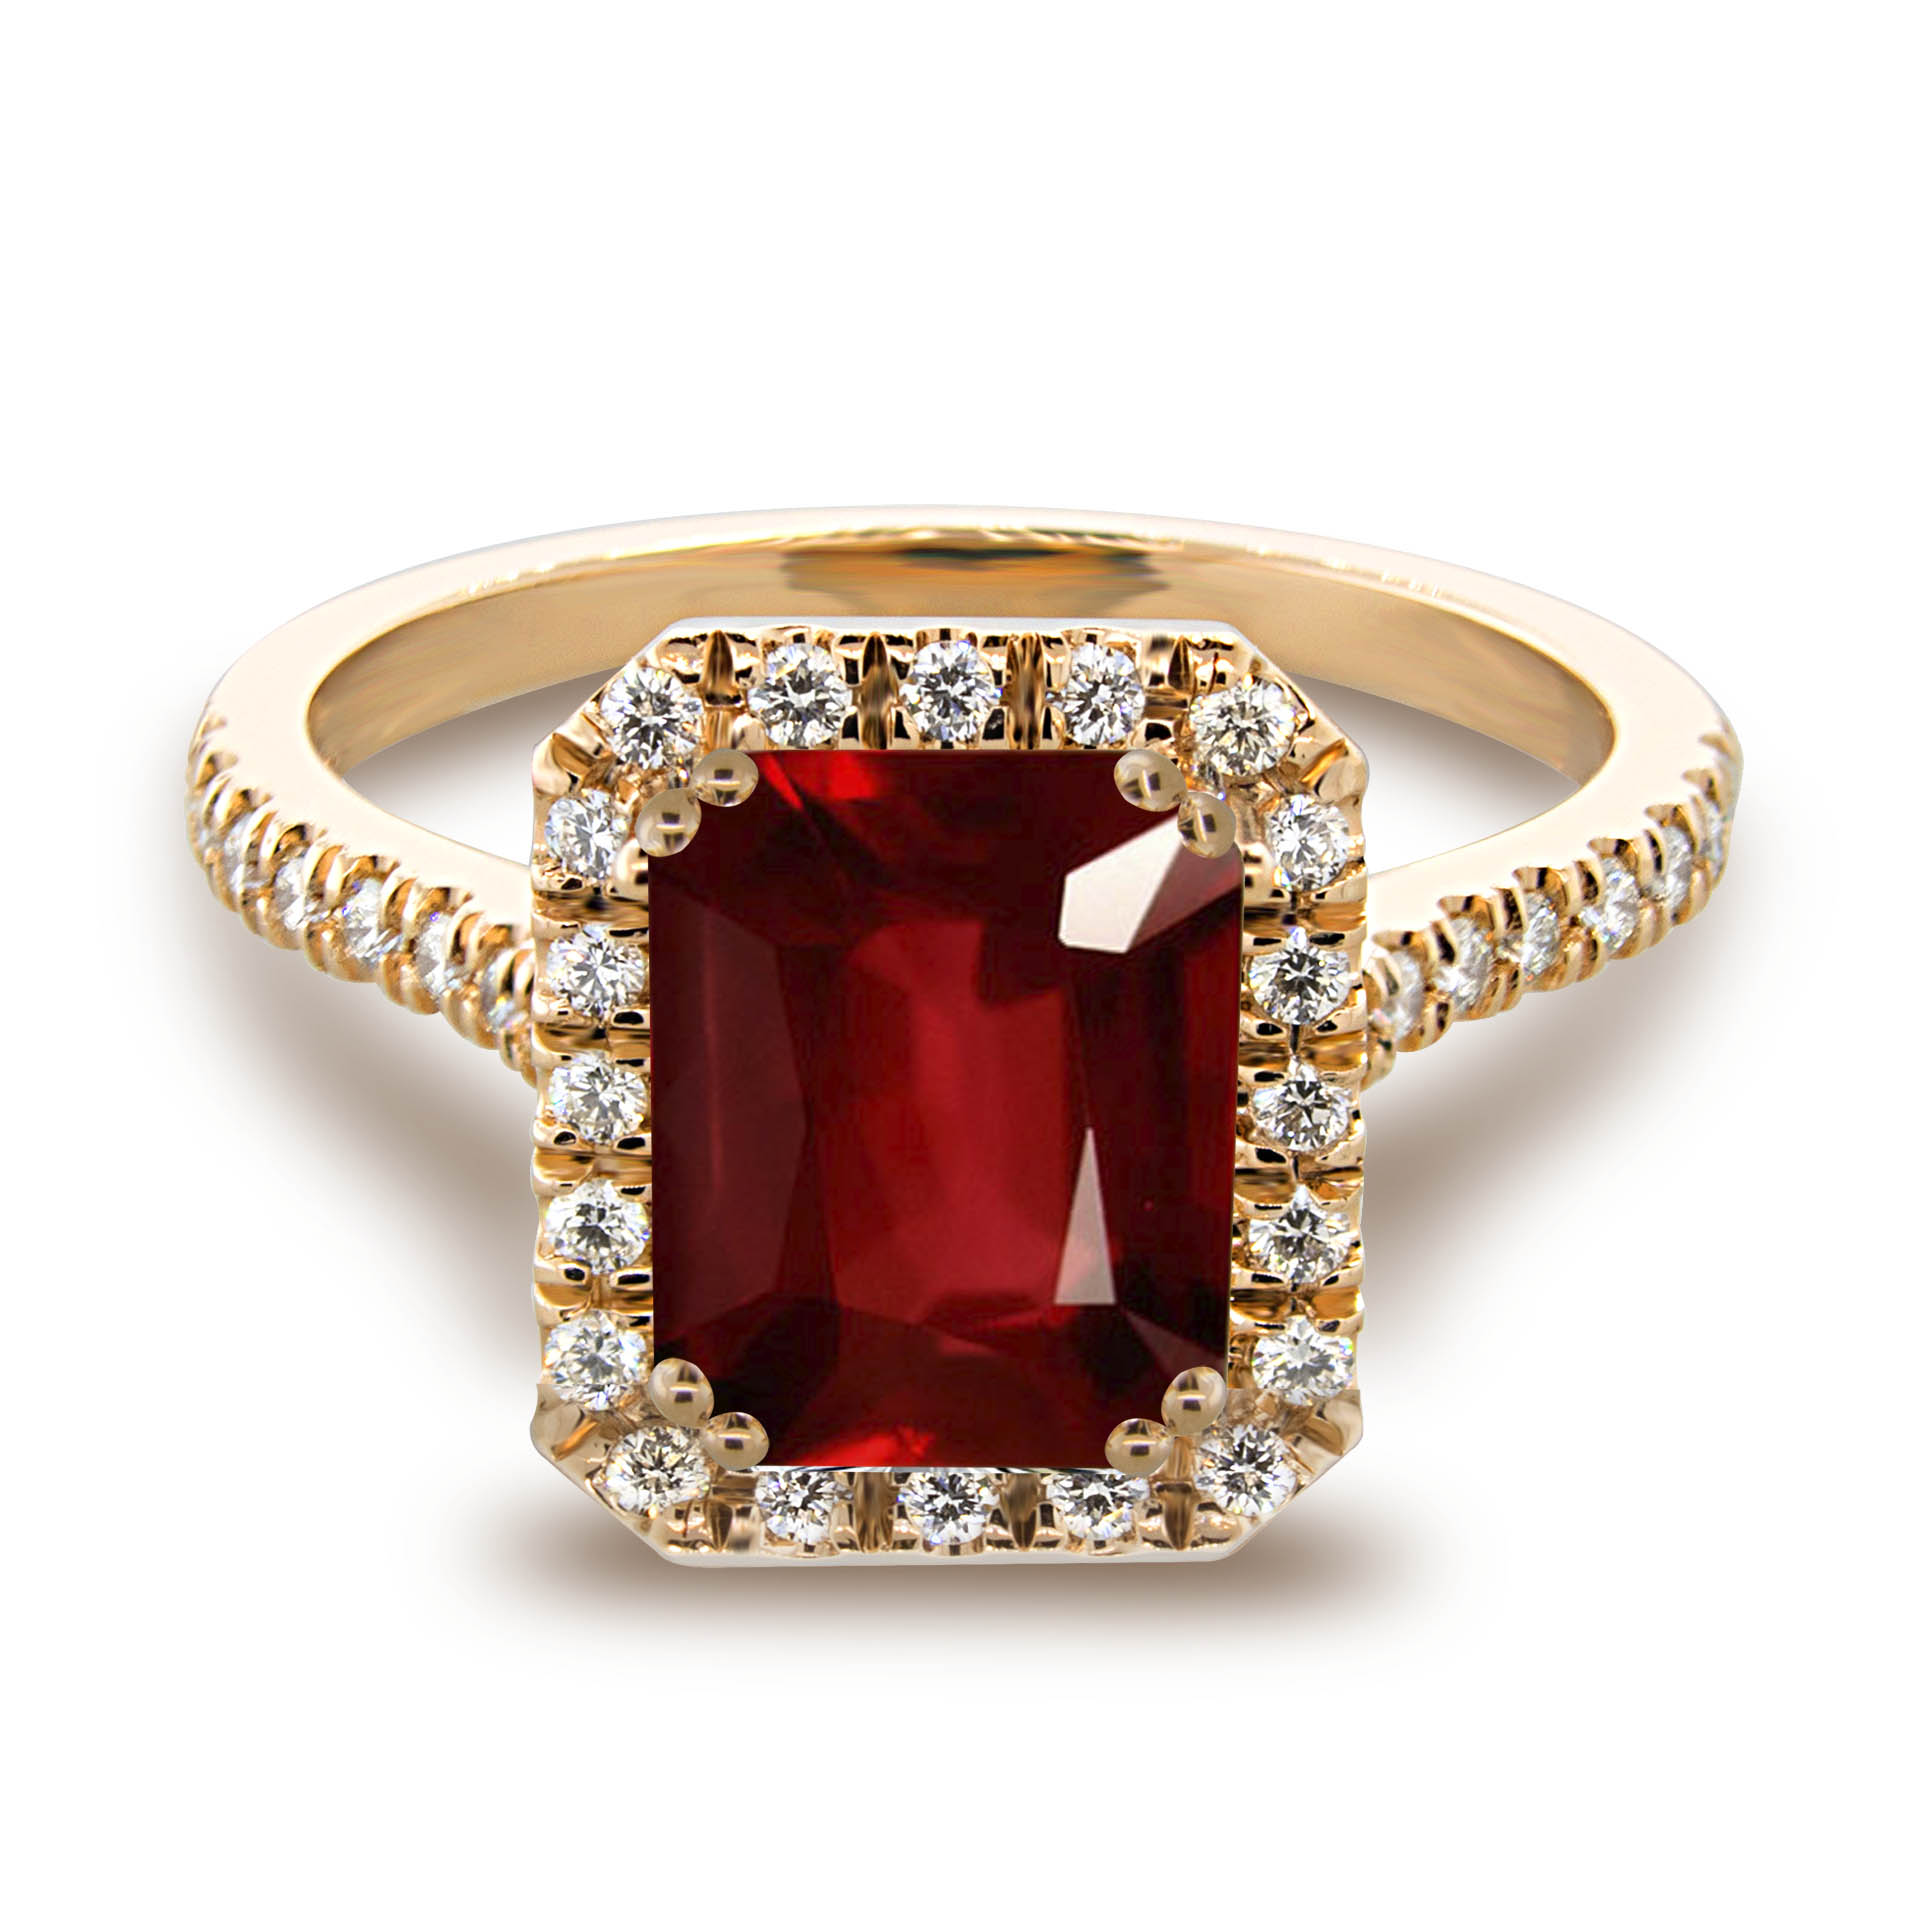 Genuine Ruby Halo Engagement Ring, Gold or Platinum - Sarkisians Jewelry